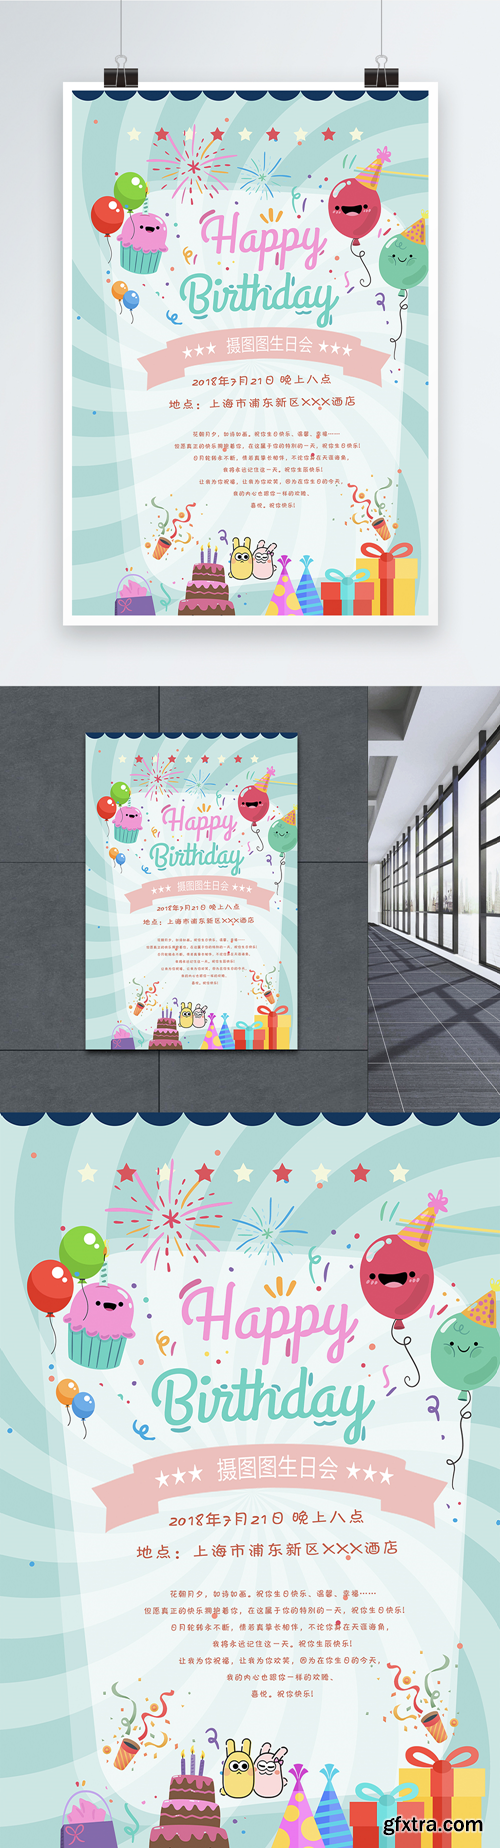 birthday party poster